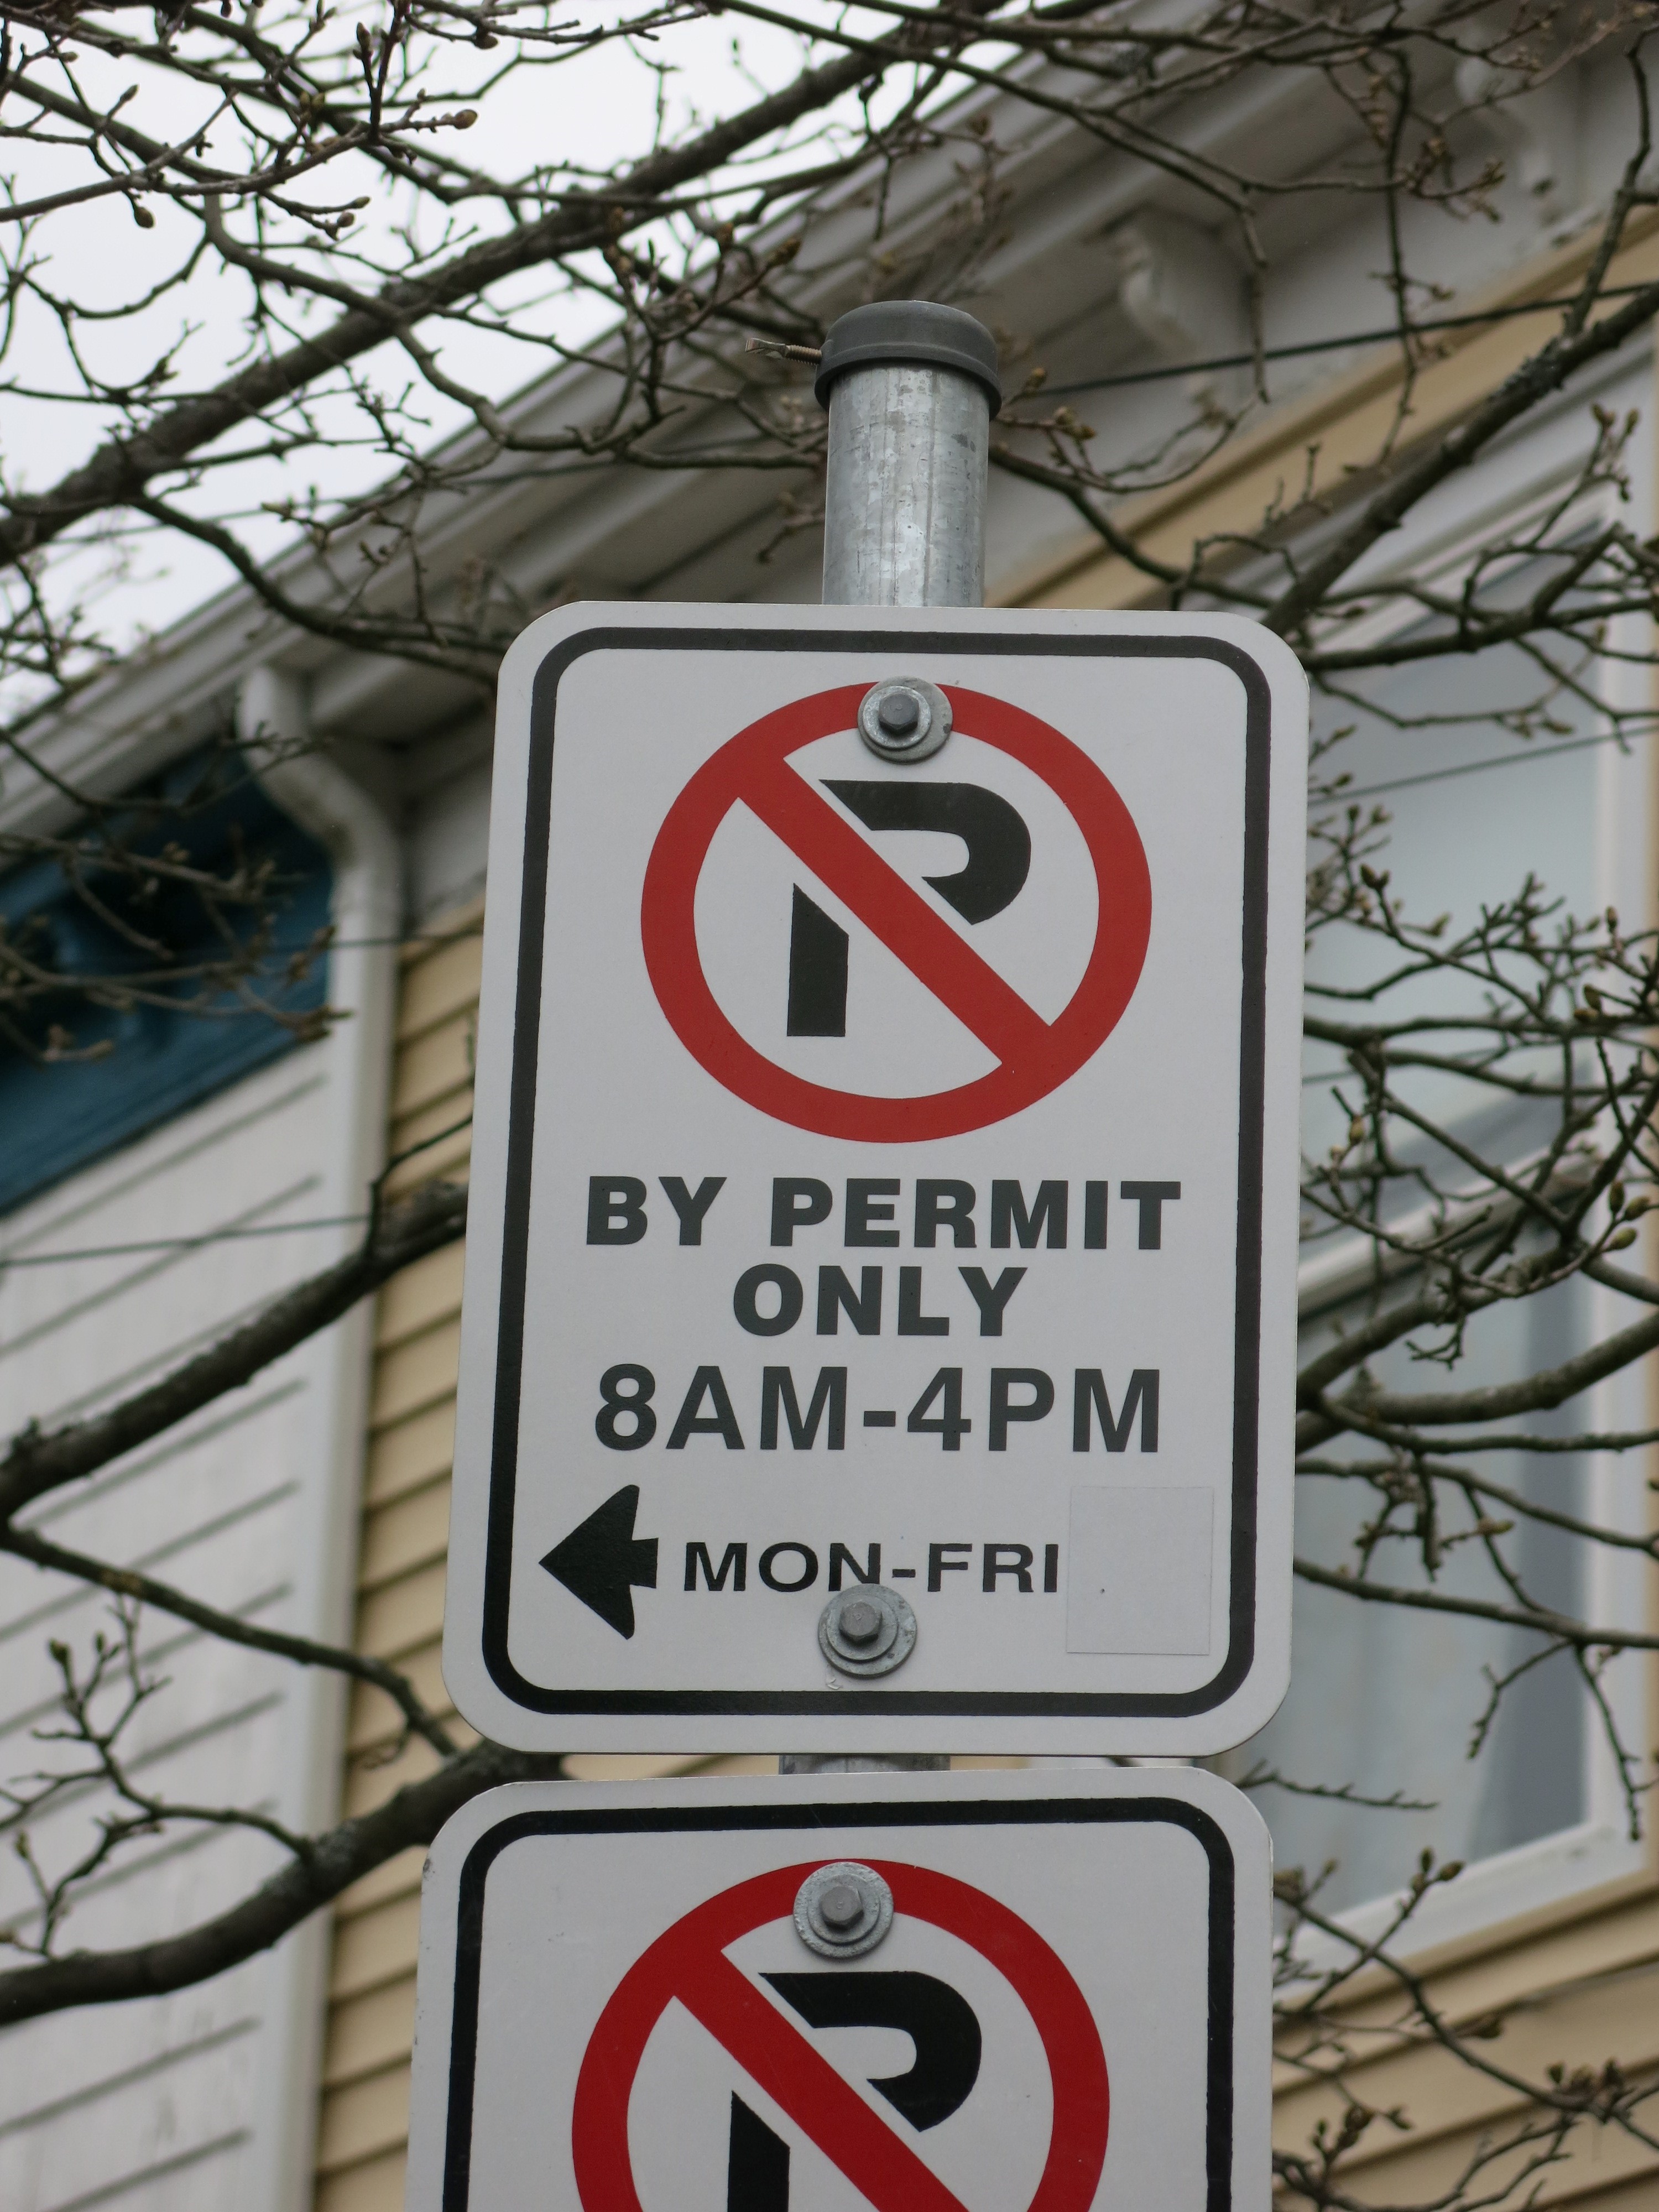 A municipal "No Parking, By Permit Only" sign with tree branches and a house in the background.